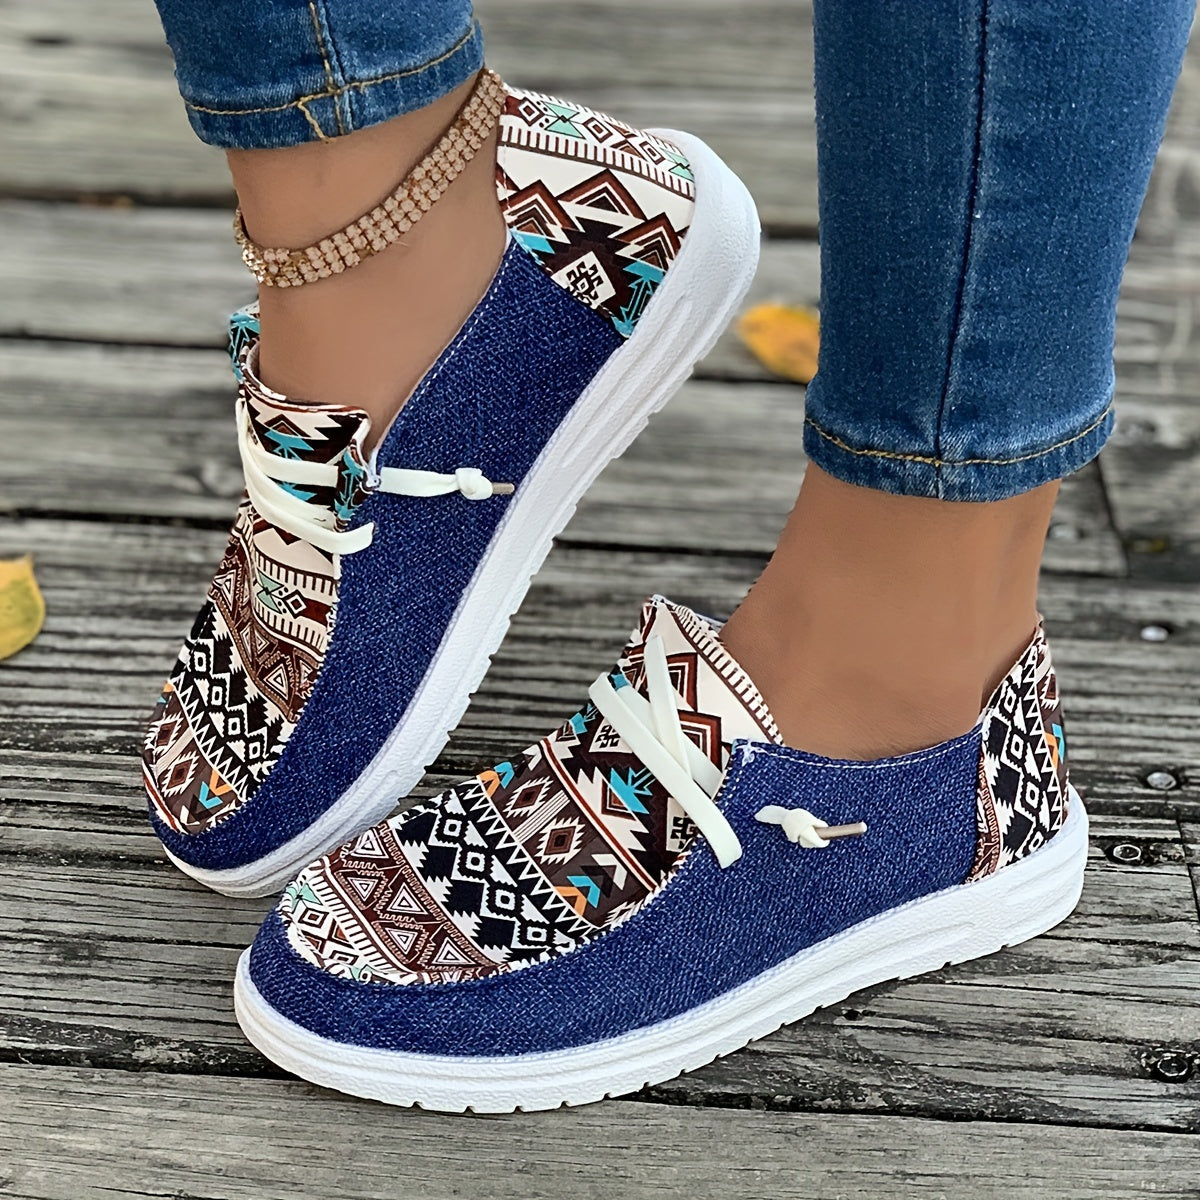 Women's Tribal Pattern Canvas Shoes, Round Toe Low Top Flat Sneakers, Casual Lightweight Walking Shoes